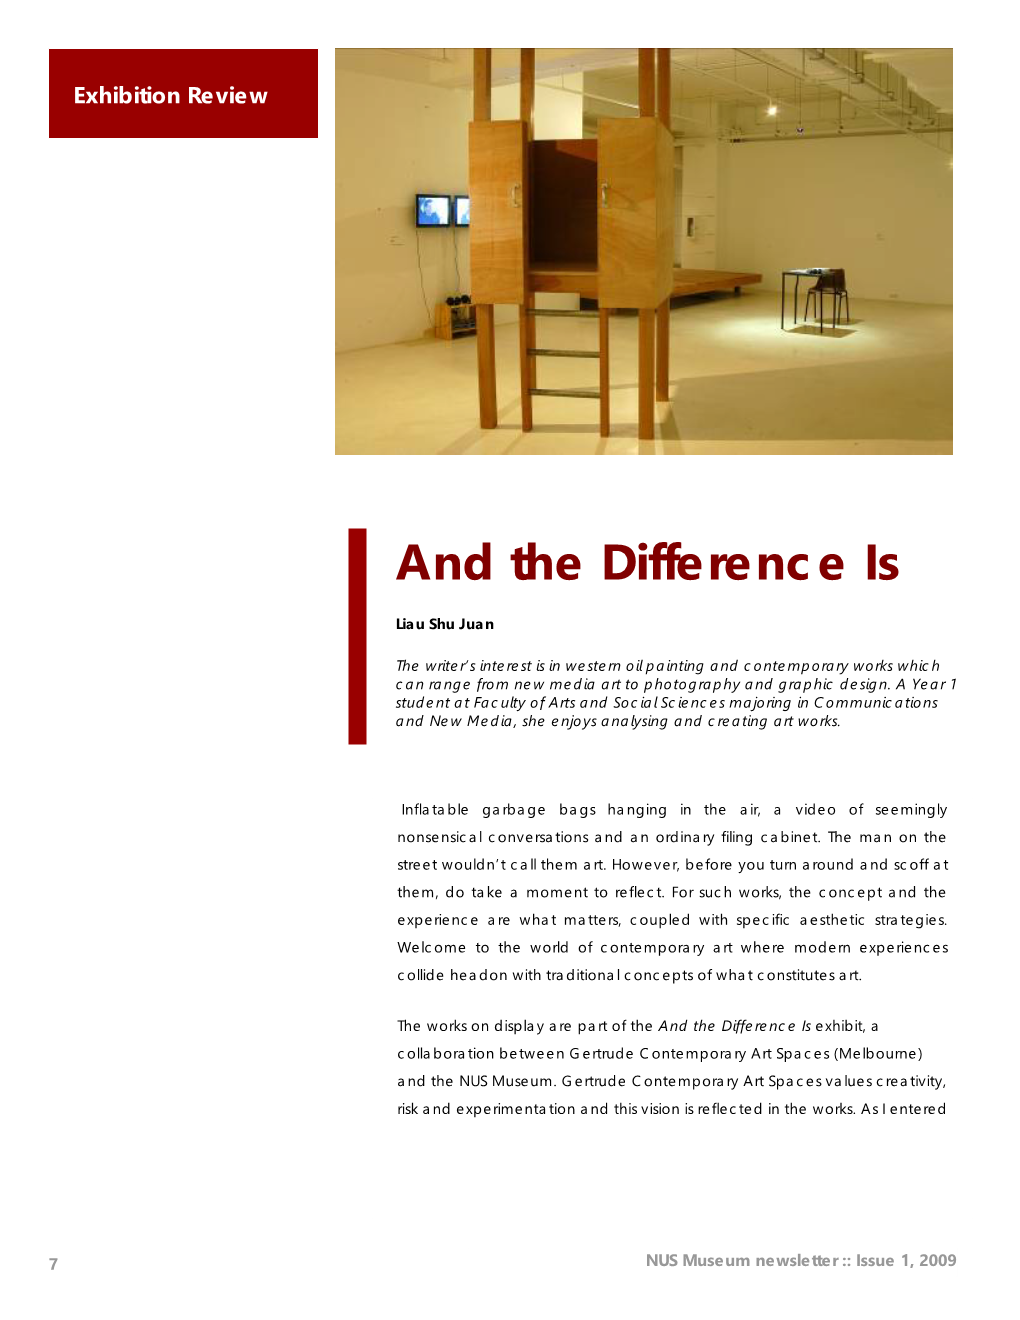 NUS Museum and the Difference Is Review